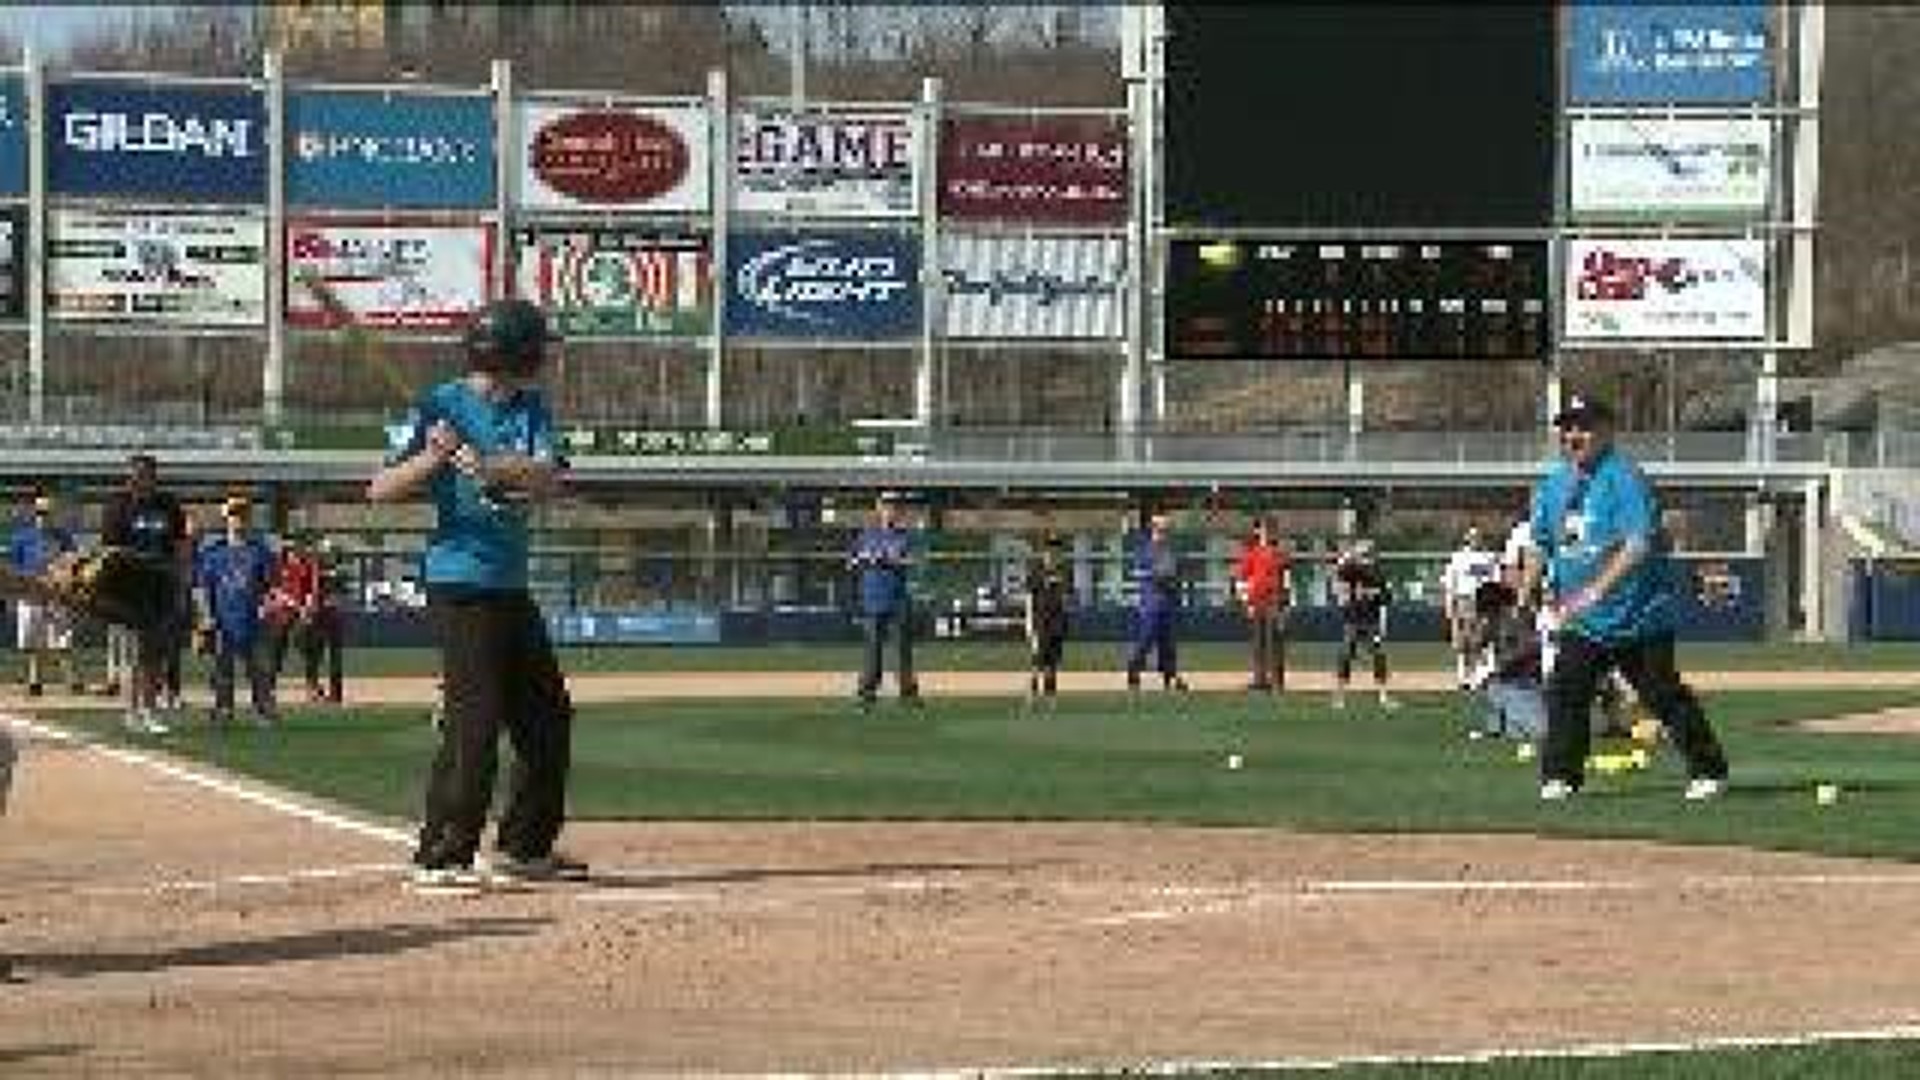 Challenger Baseball At PNC Field